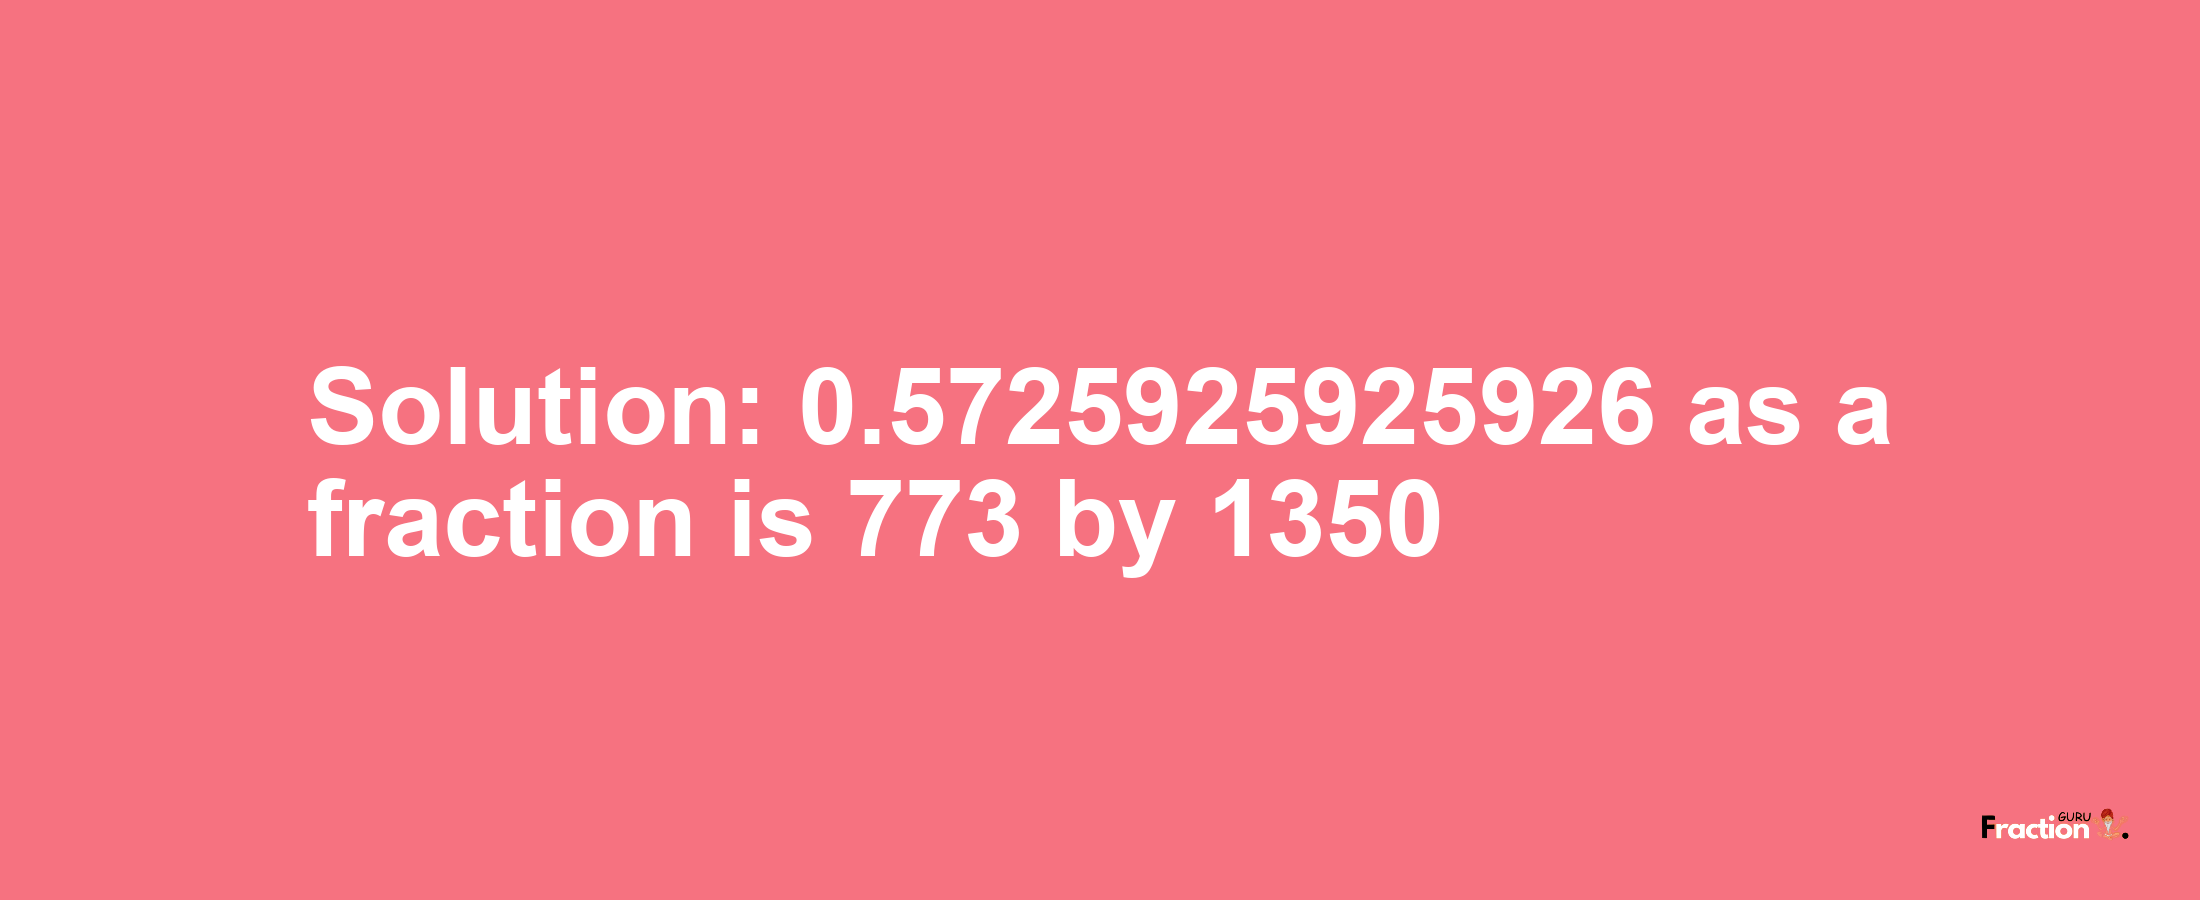 Solution:0.5725925925926 as a fraction is 773/1350